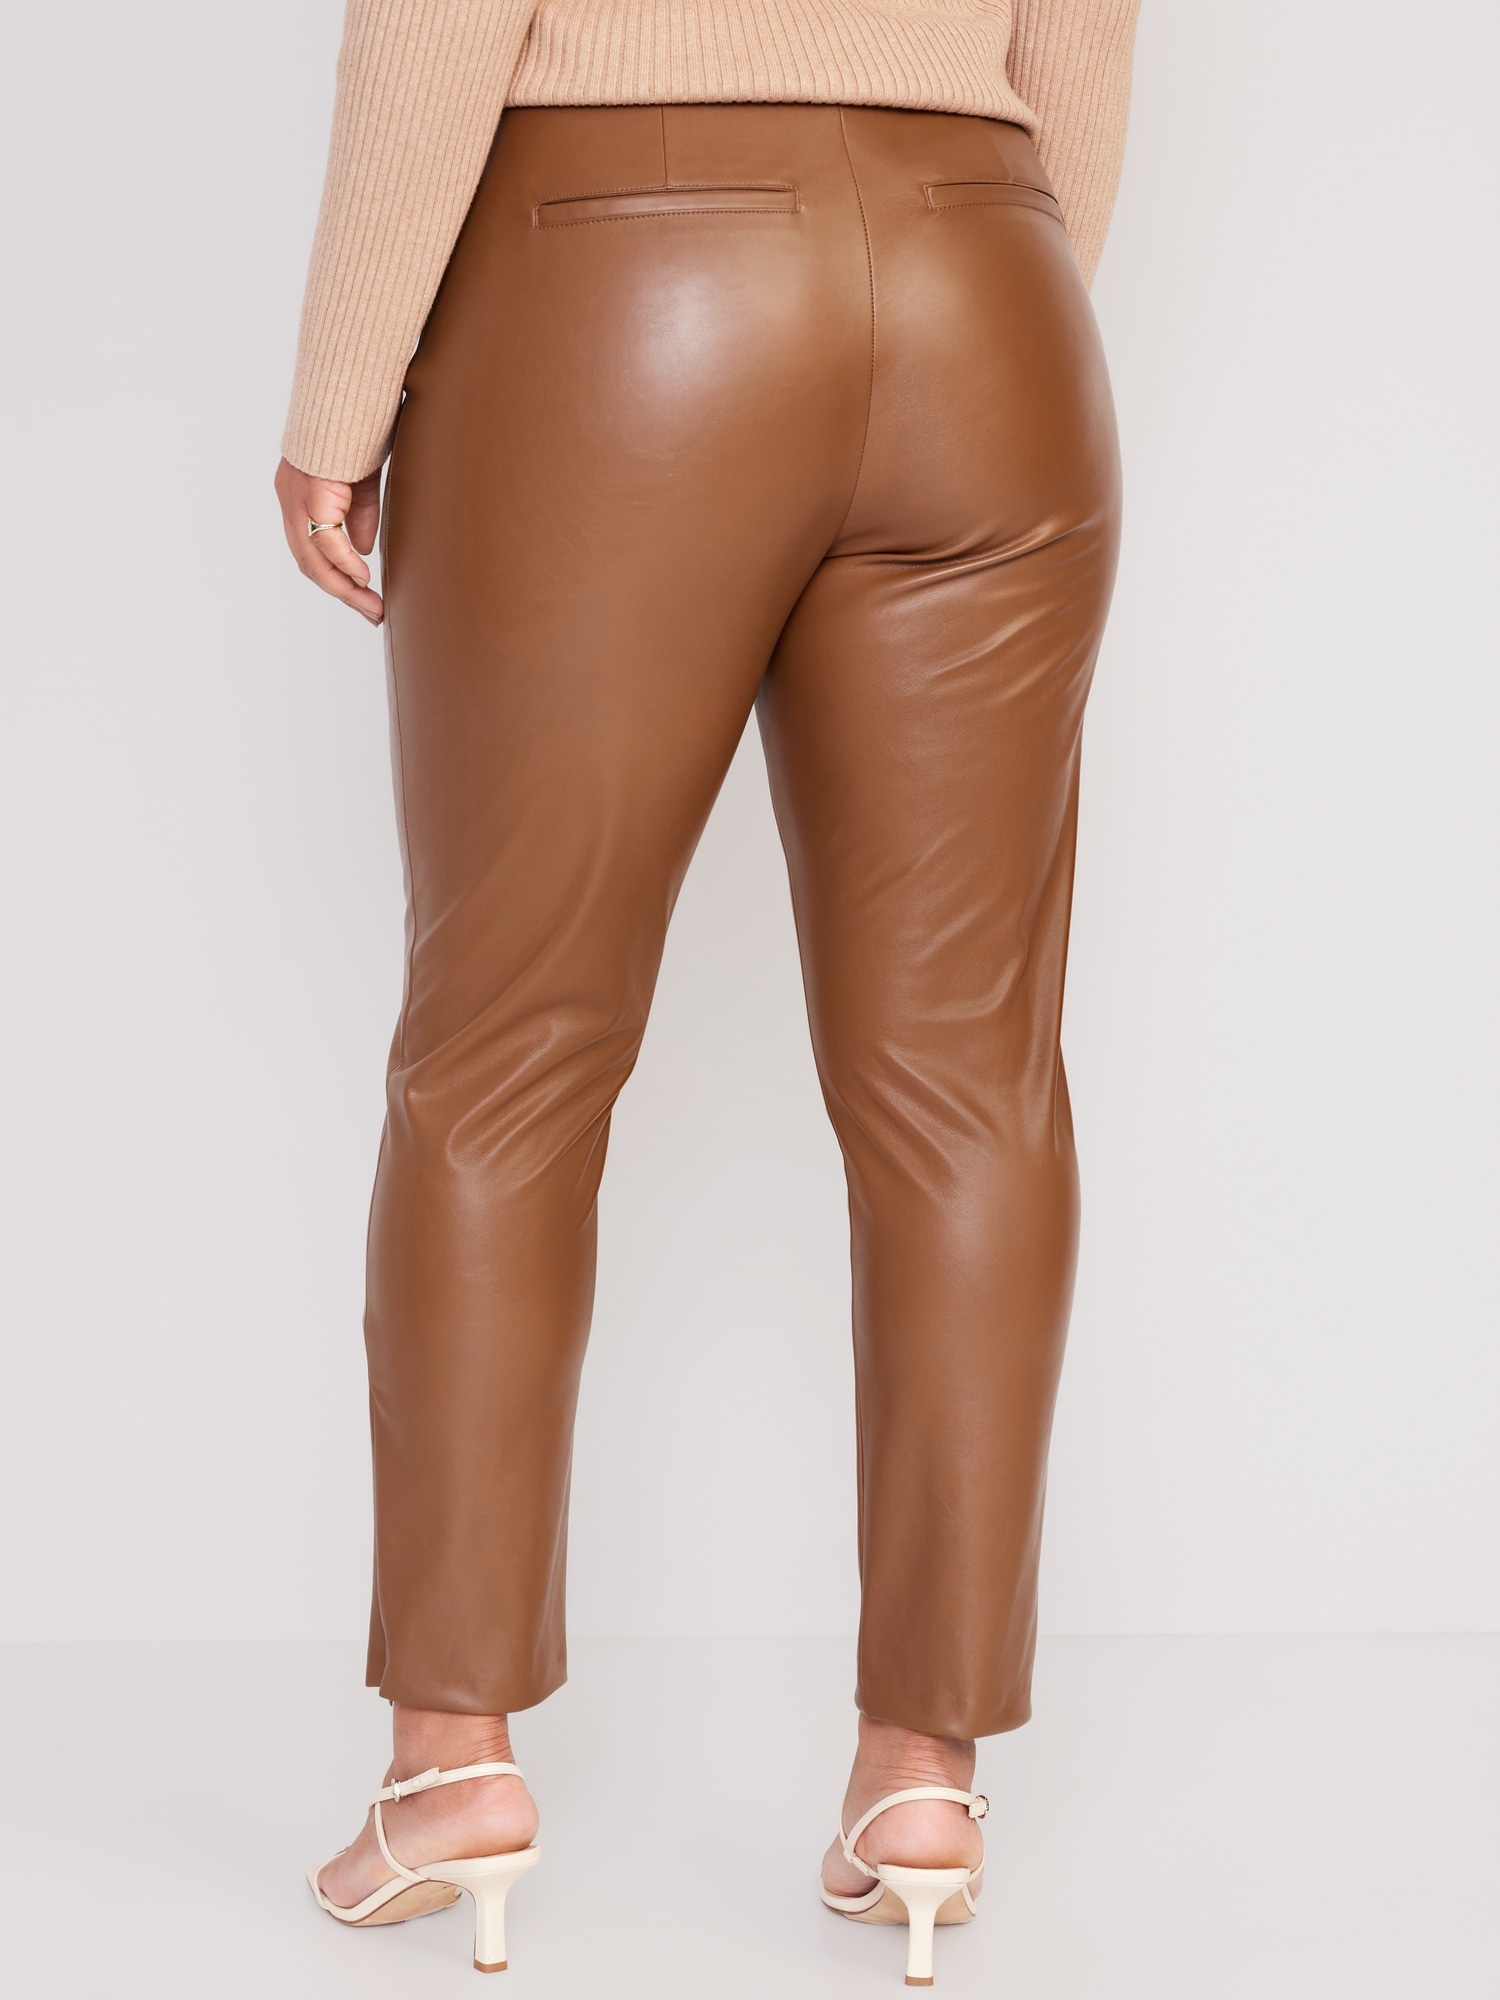 Image of: Brown faux leather pants